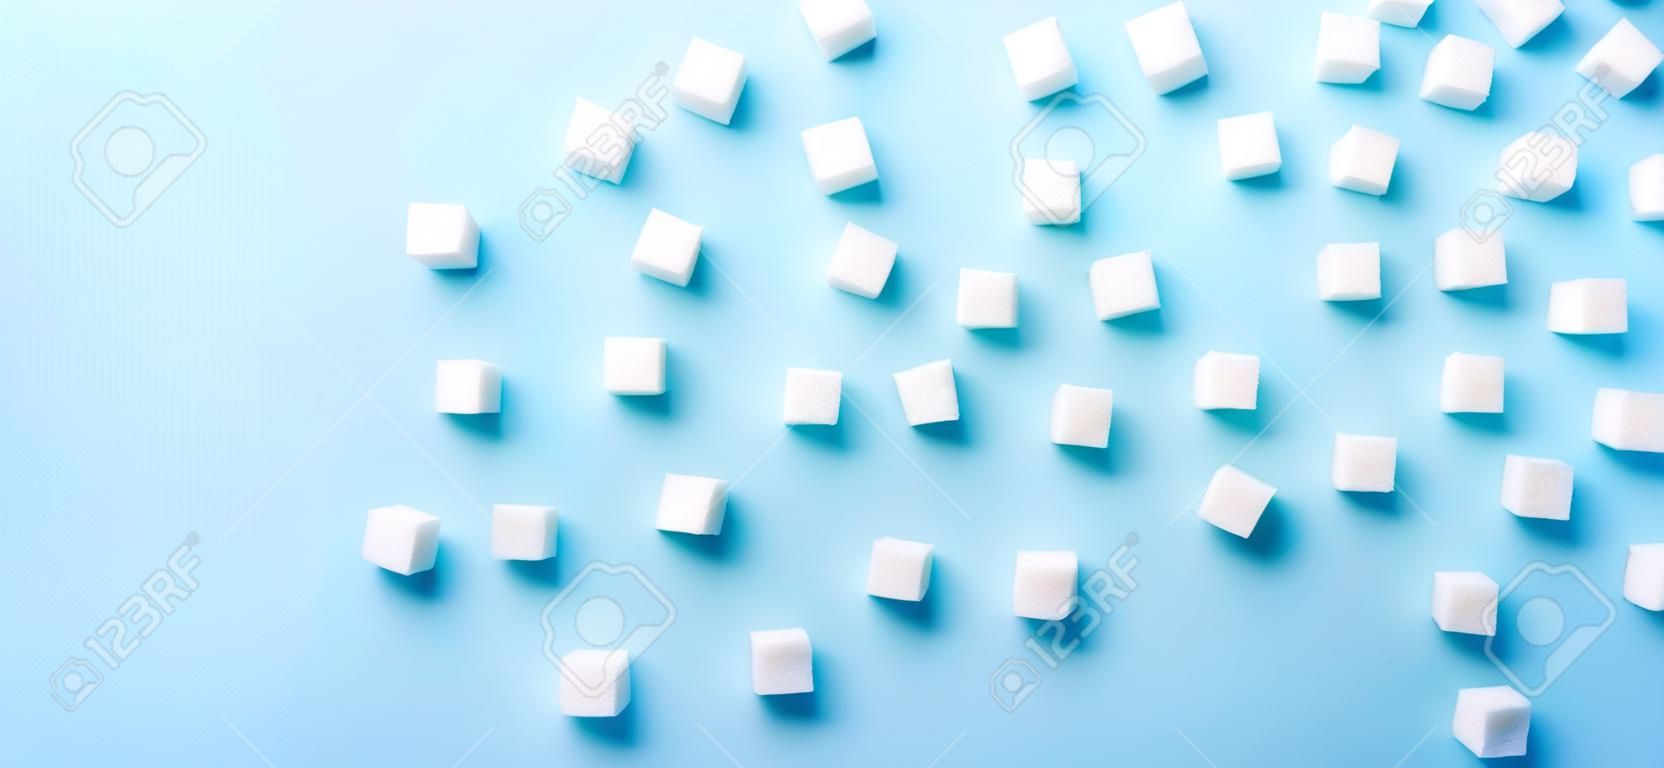 Sugar cubes regular pattern on blue background, flat lay banner with copy space